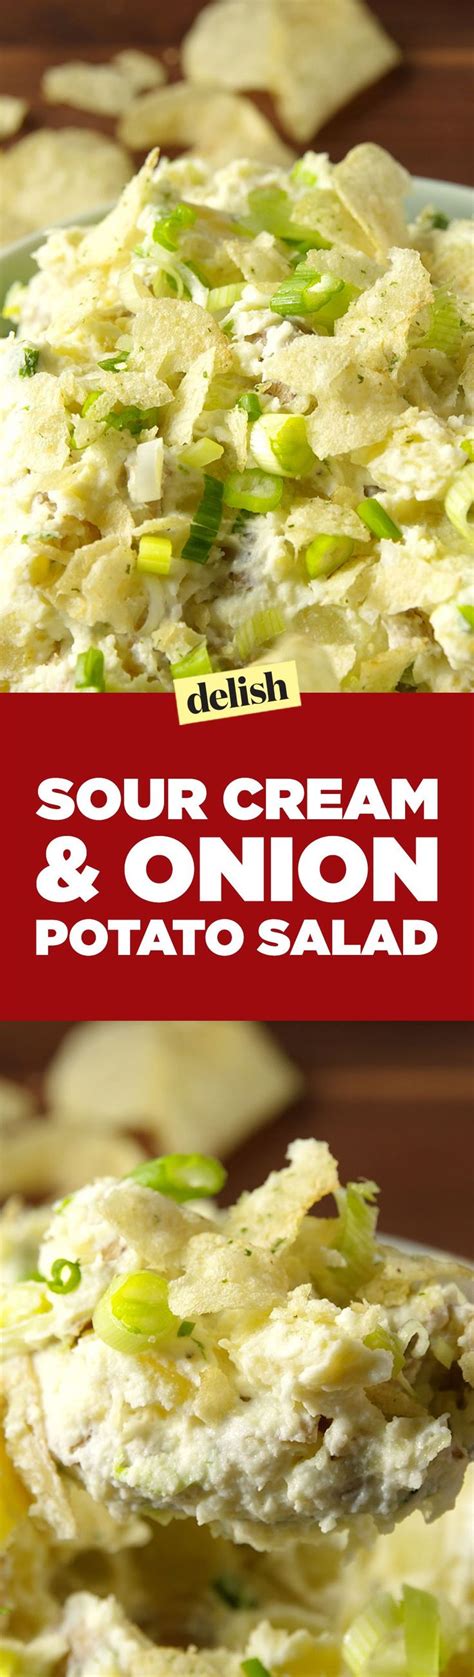 Mix the sour cream, buttermilk, chives and lemon juice in a large bowl and season with salt and pepper. Sour Cream 'n Onion Potato Salad | Recipe | Sour cream and onion, Potato salad, Sour cream